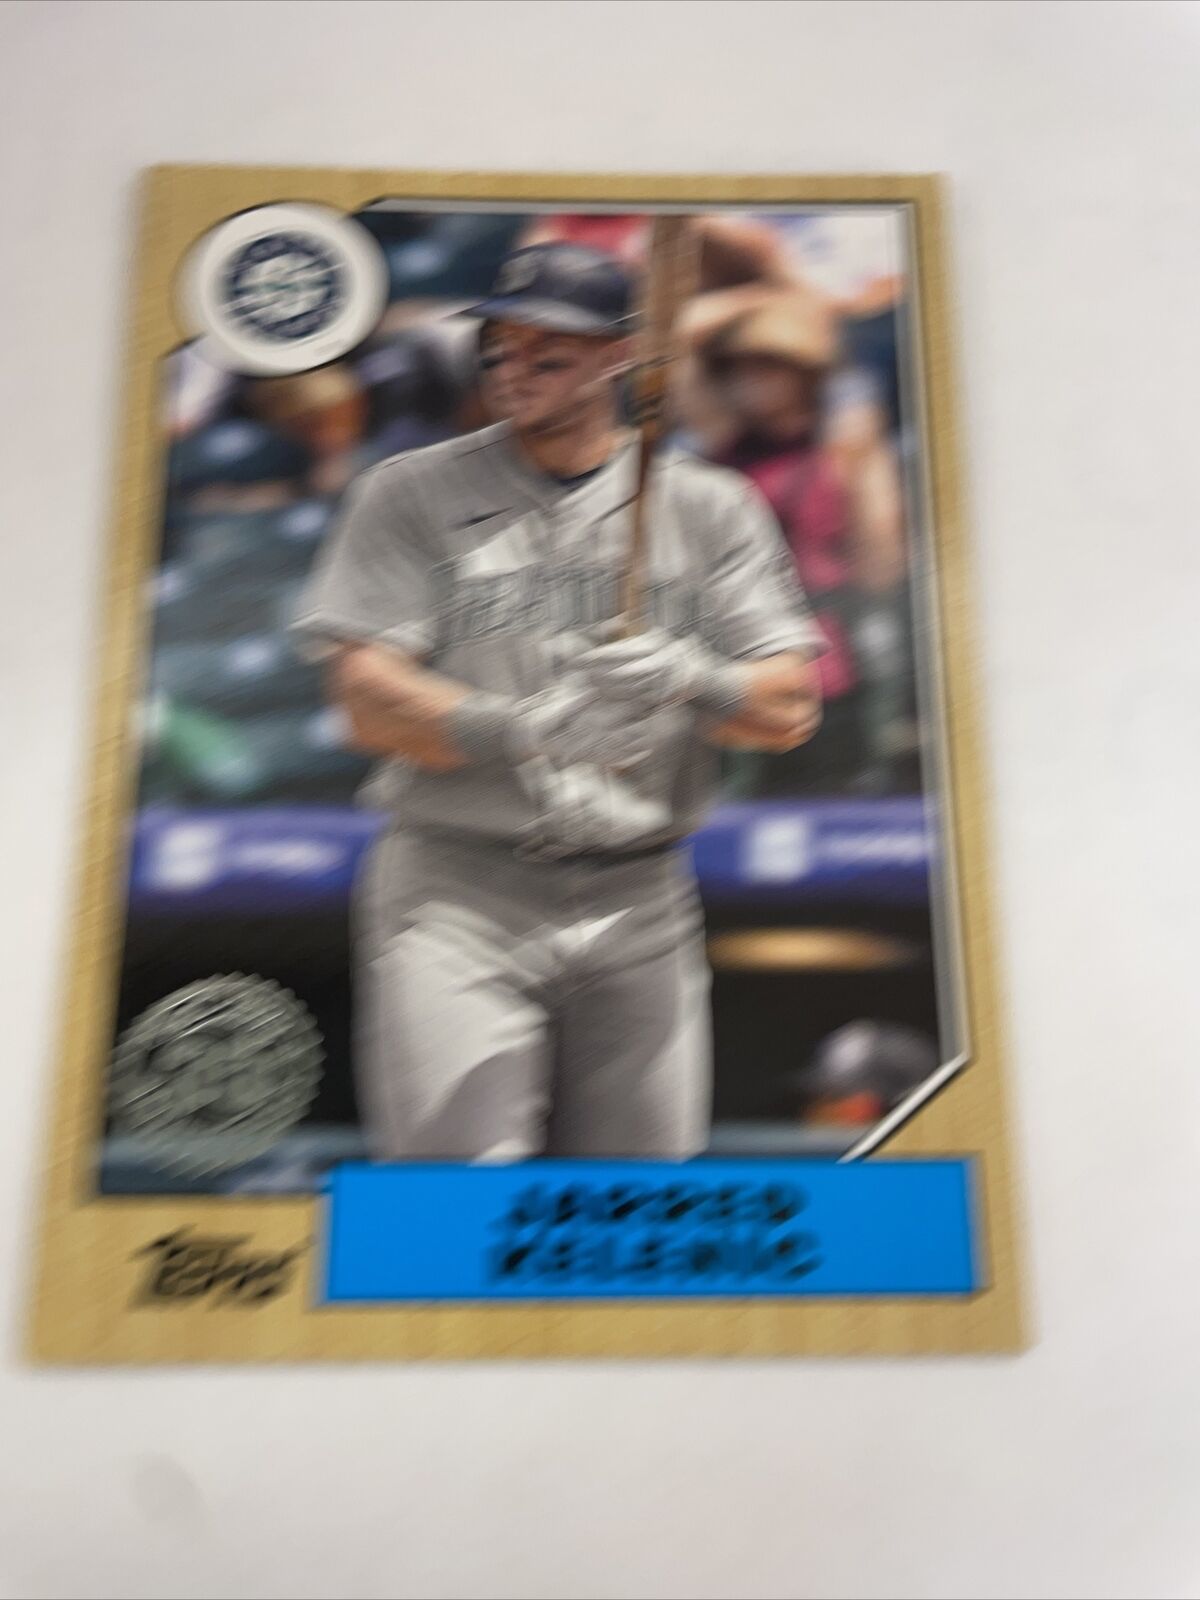 Primary image for JARRED KELENIC 2022 TOPPS SERIES 1 1987 35TH ANNIVERSARY #T87-42 MARINERS